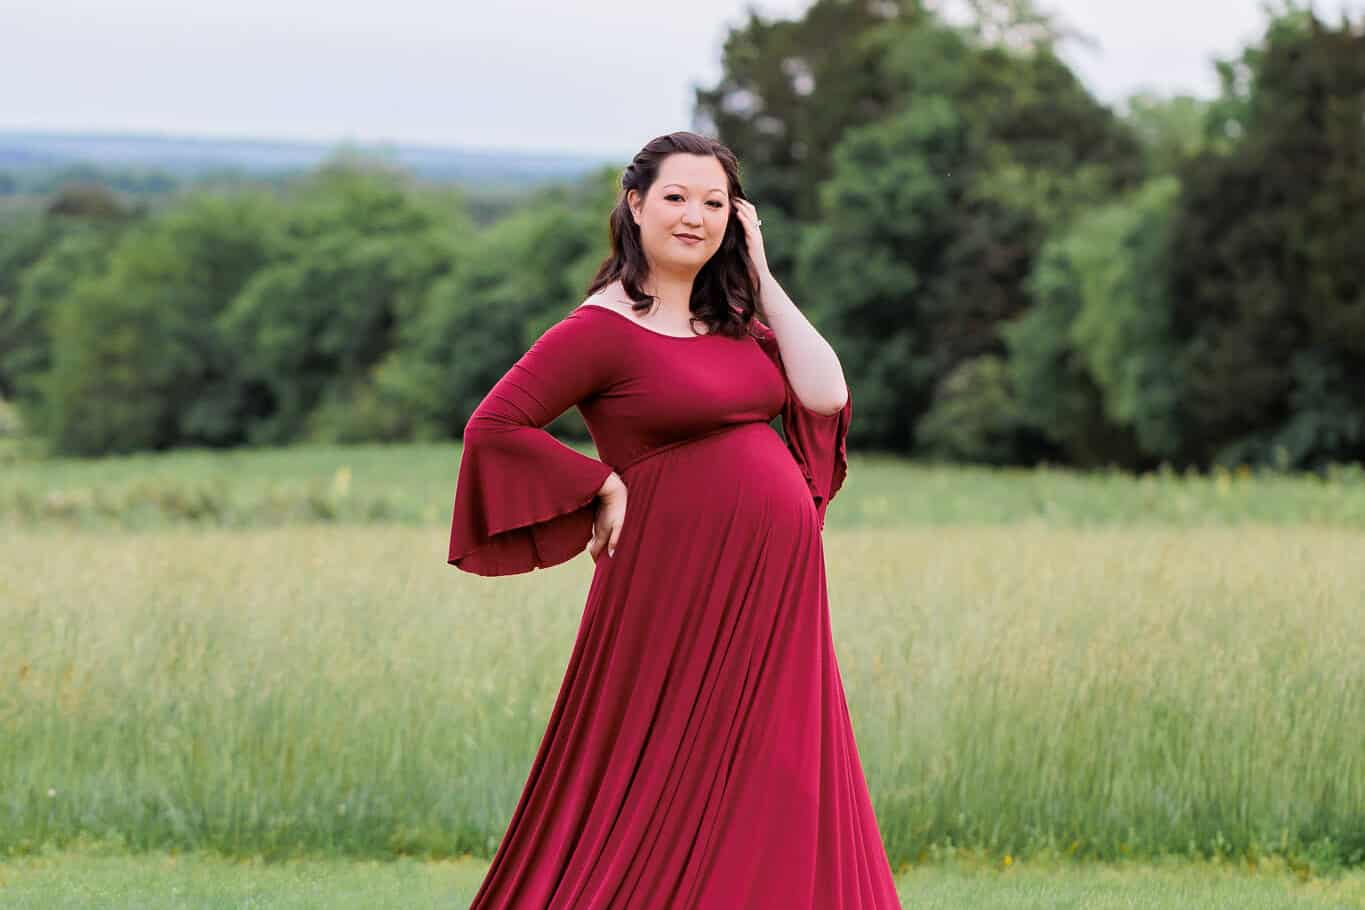 A blog about Postpartum Support Virginia featuring a photo of a pregnant woman with brown hair posing and a red dress in a field.